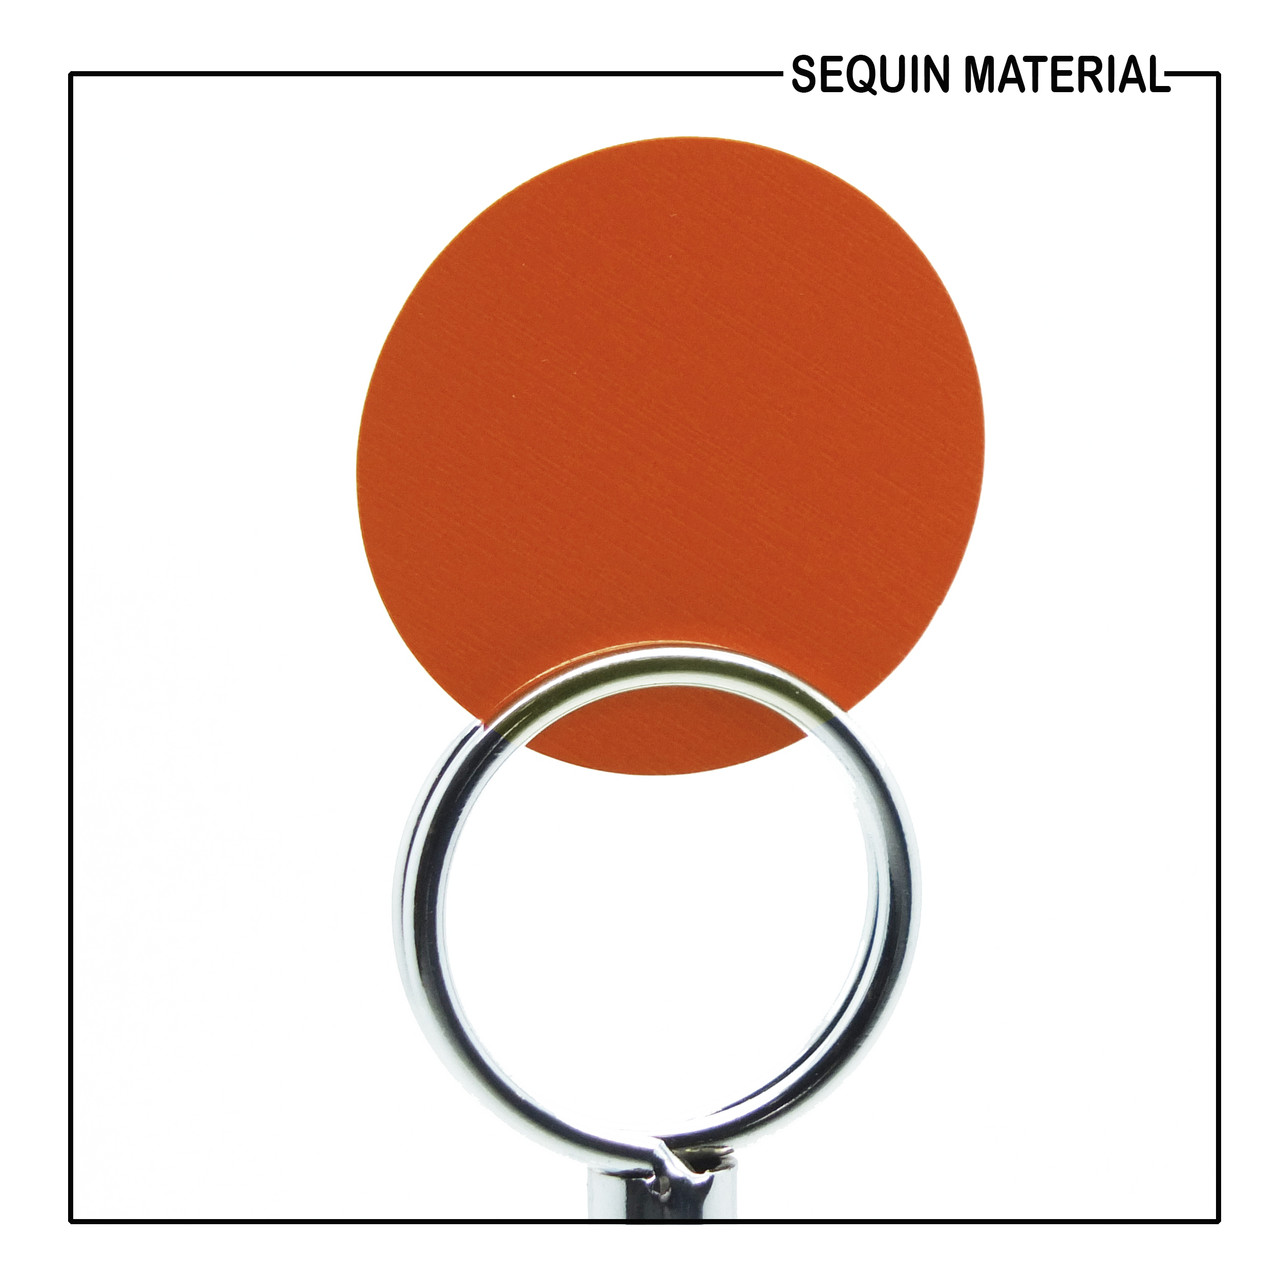 SequinsUSA Orange Opaque Glossy High Shine Sequin Material RL805